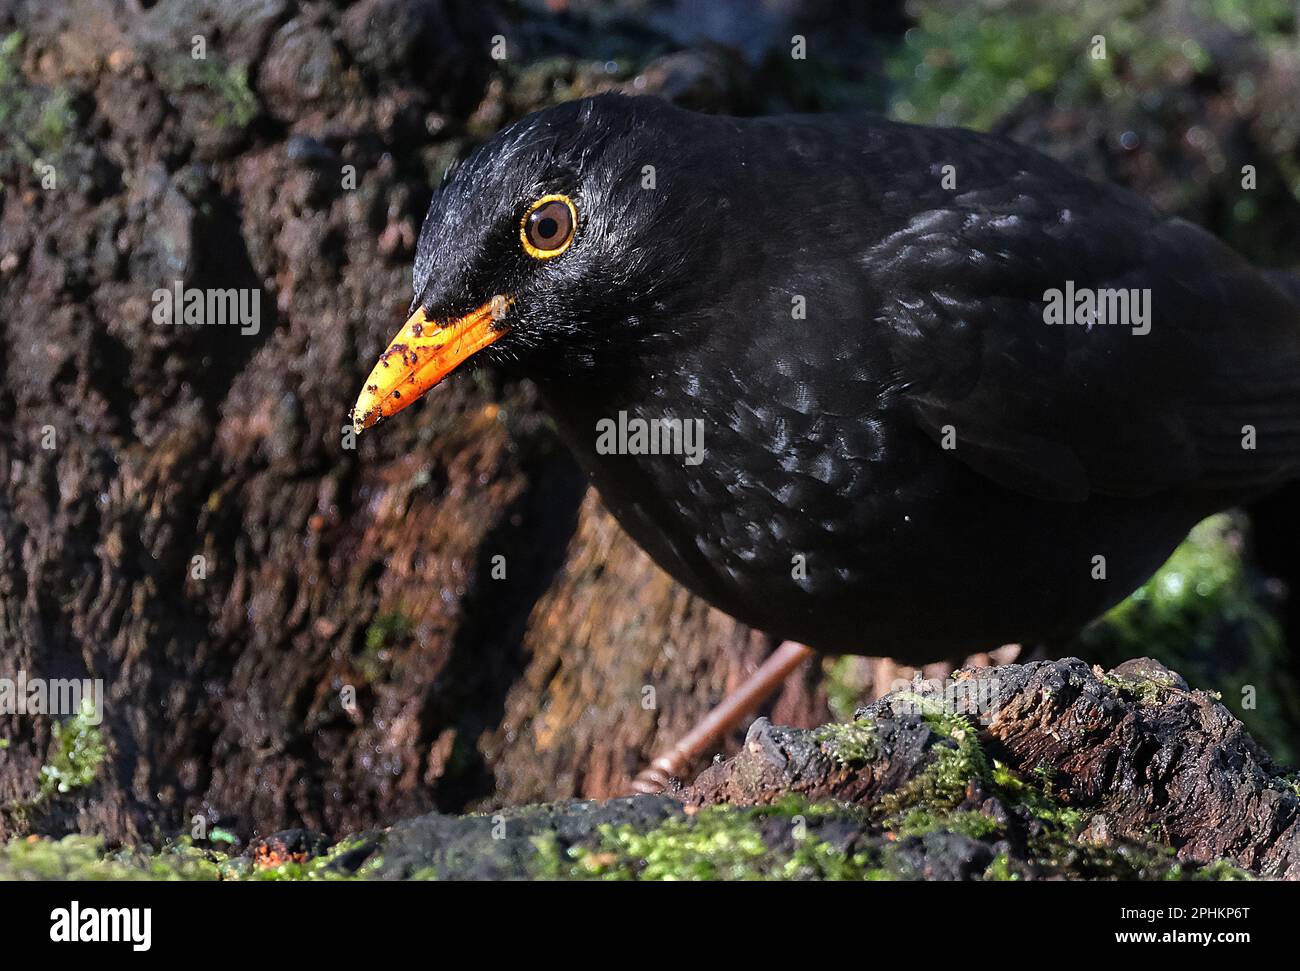 The common blackbird is a species of true thrush. It is also called the Eurasian blackbird, Stock Photo